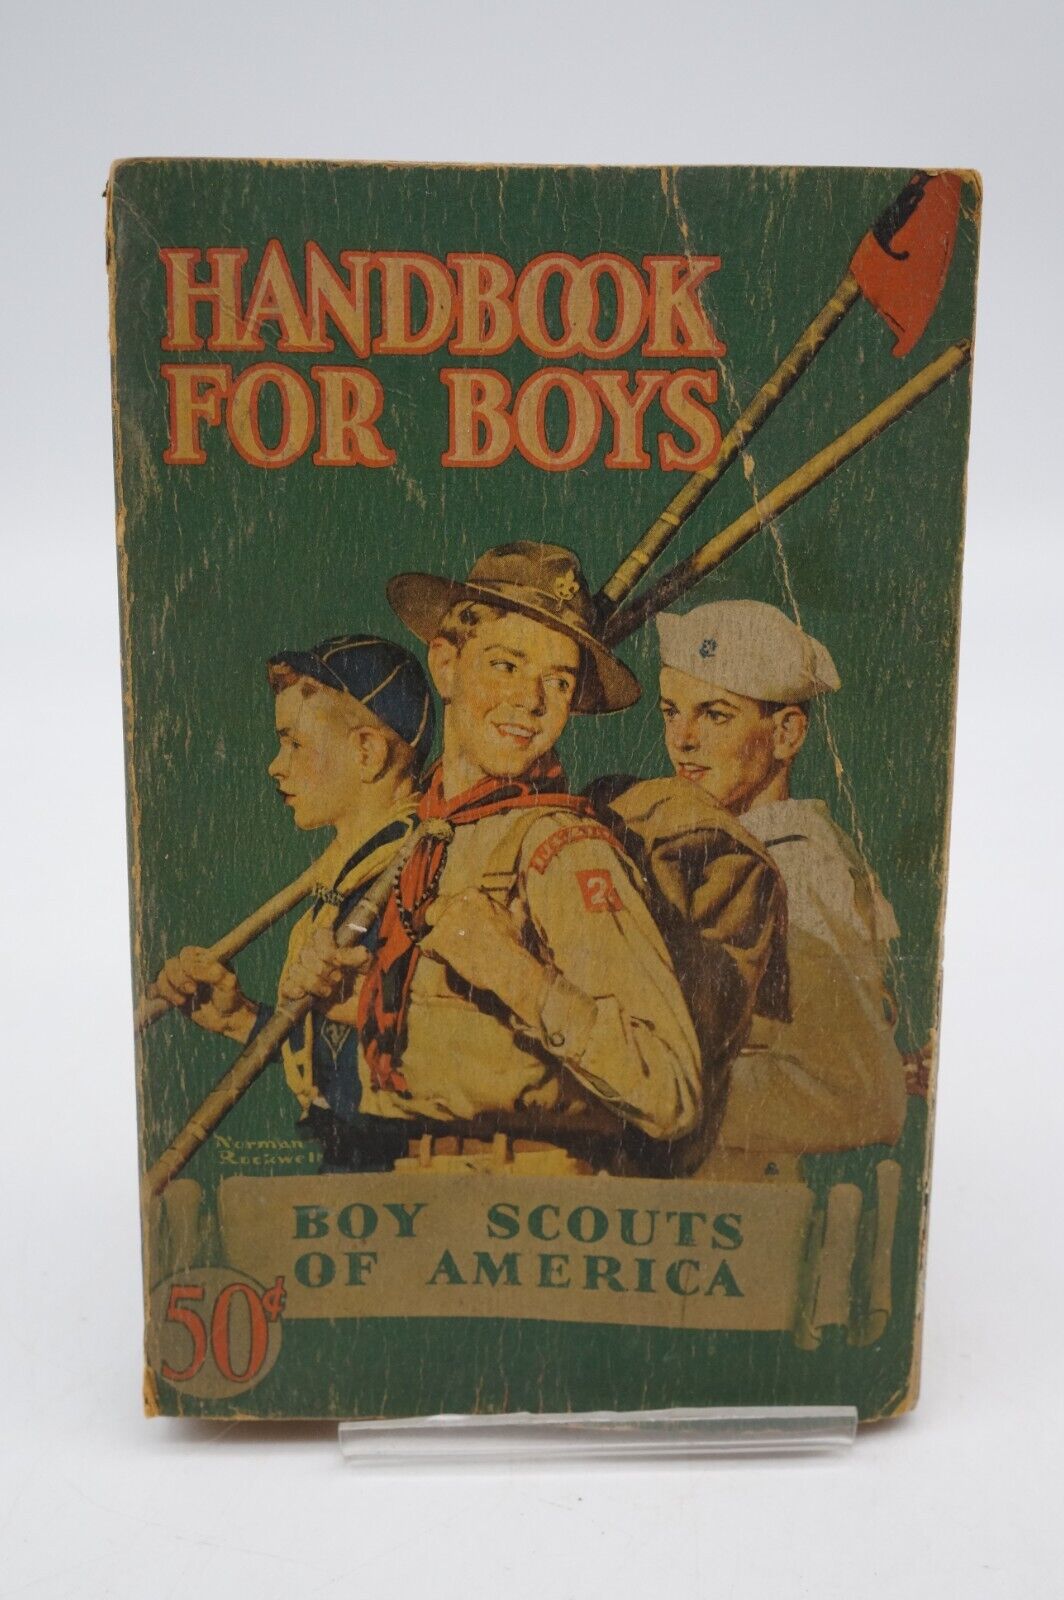 Vintage Boy Scouts of America Handbook for Boys BSA 1946 Norman Rockwell